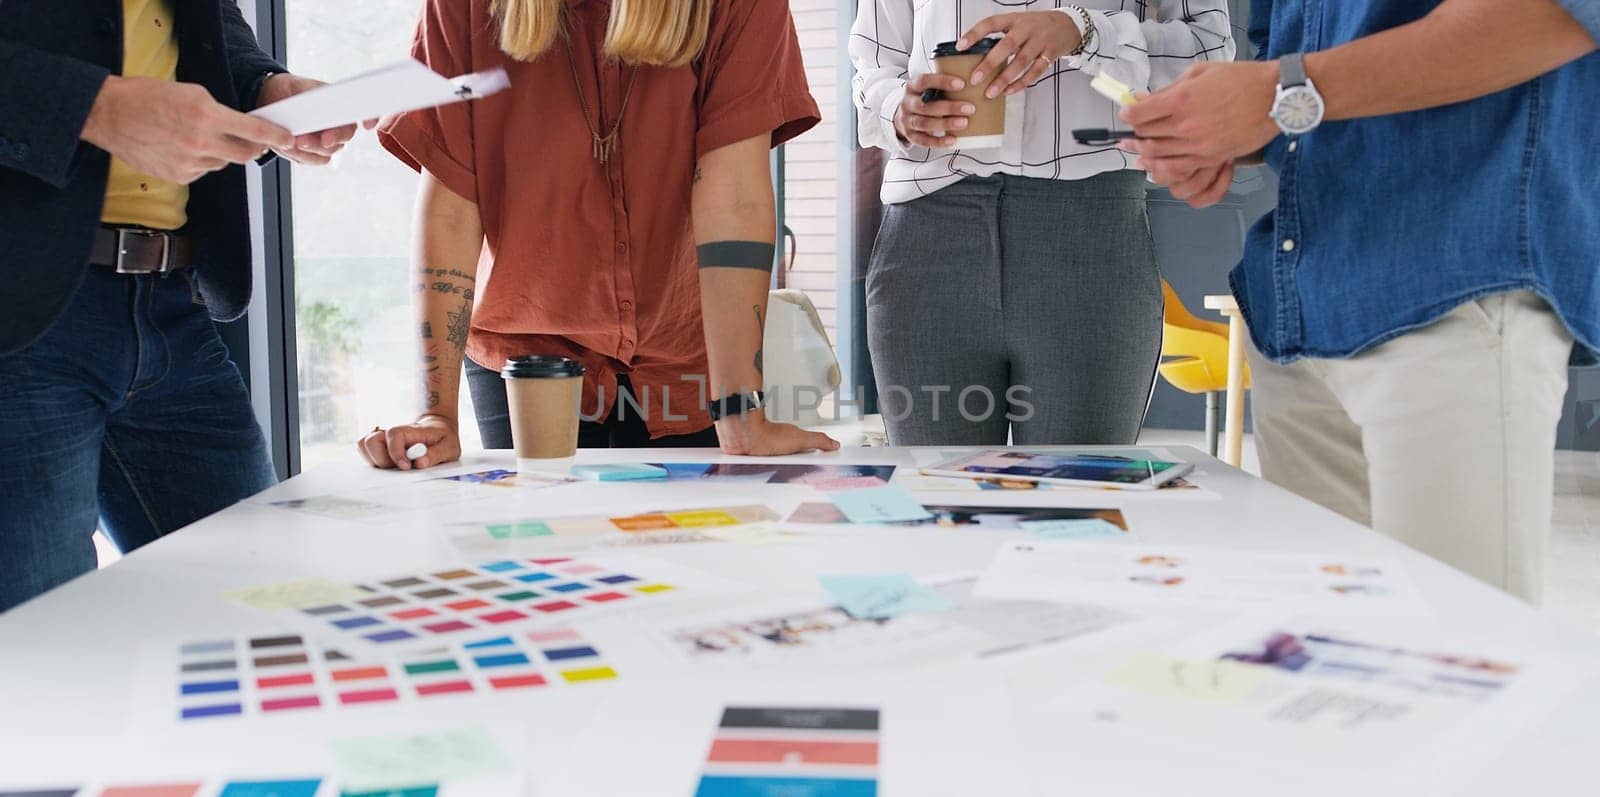 Taking the project from concept to completion. Closeup shot of a group of designers going through paperwork together in an office